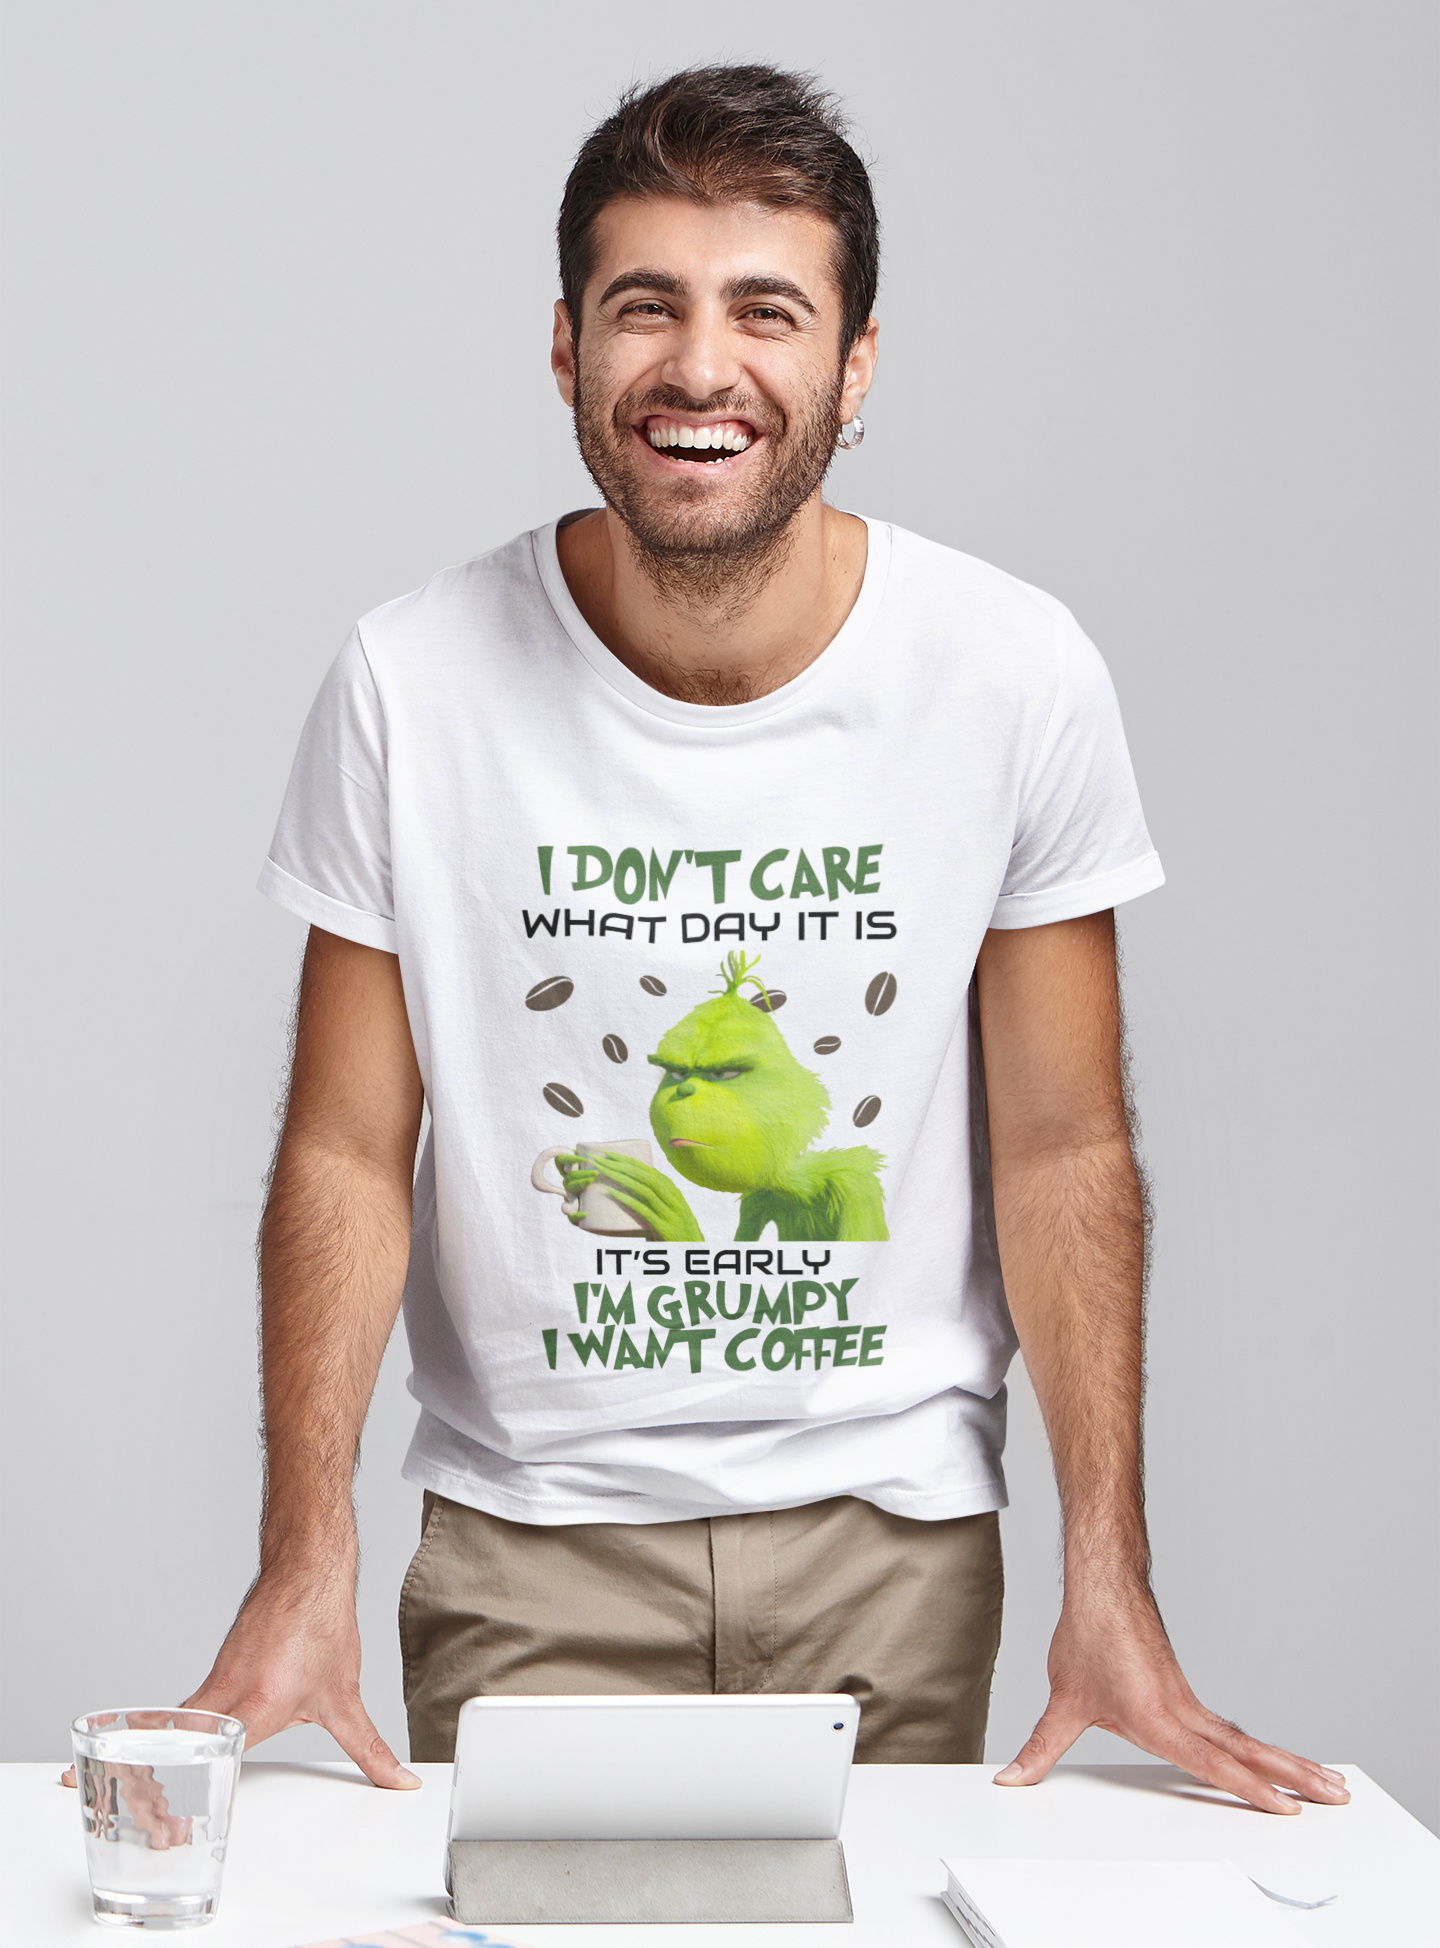 Grinch T Shirt, I Dont Care What Day It Is Tshirt, Its Early Im Grumpy I Want Coffee T Shirt, Christmas Gifts